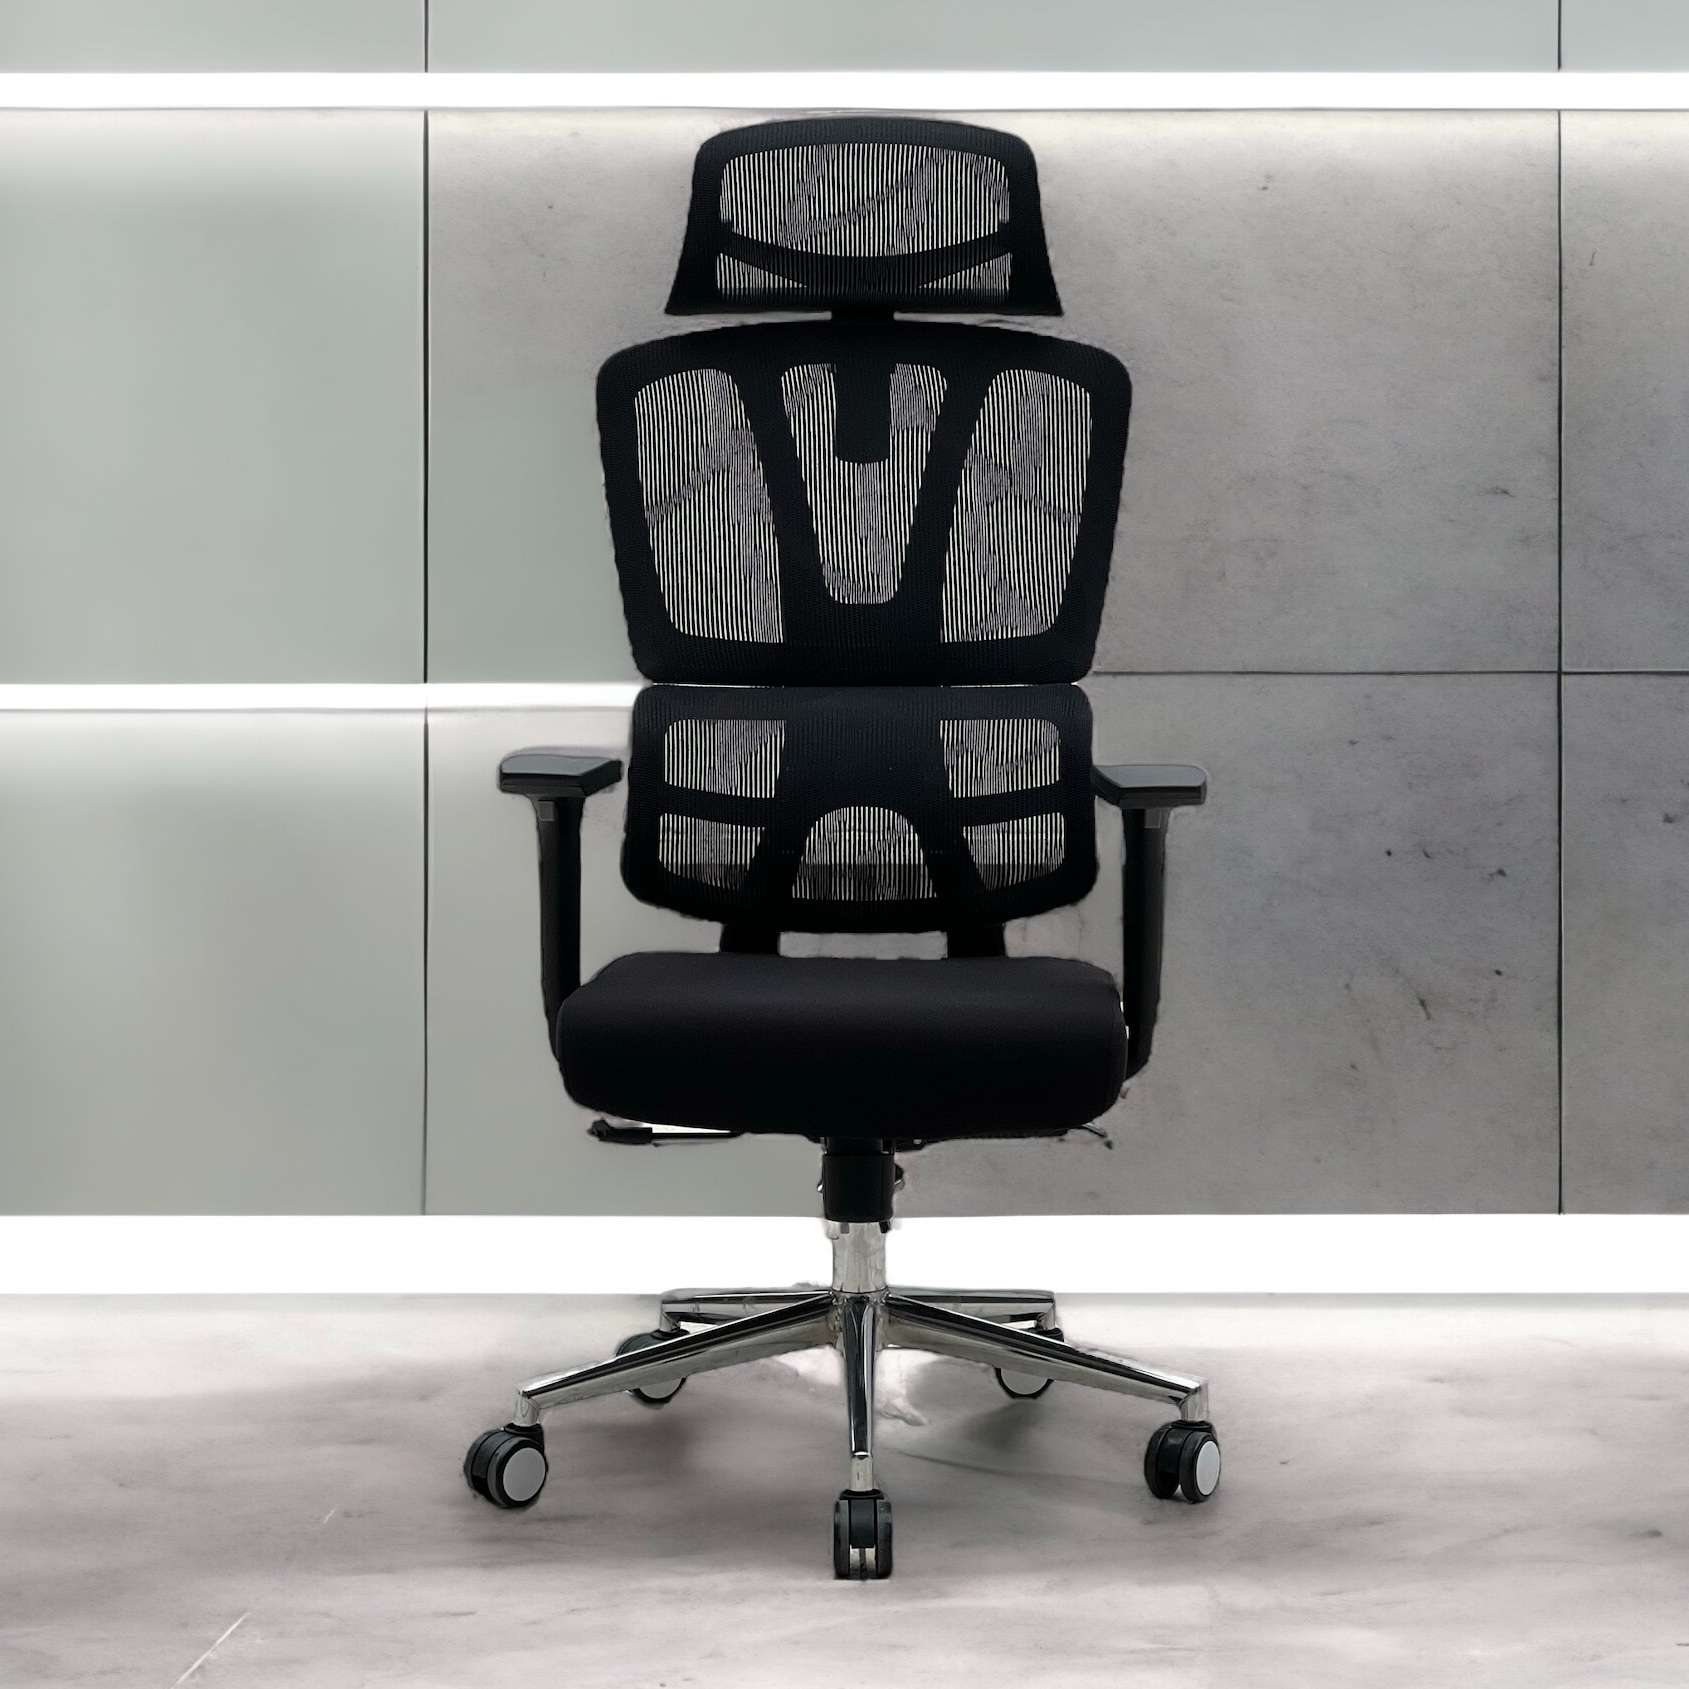 Elite Executive Chair Featured Image